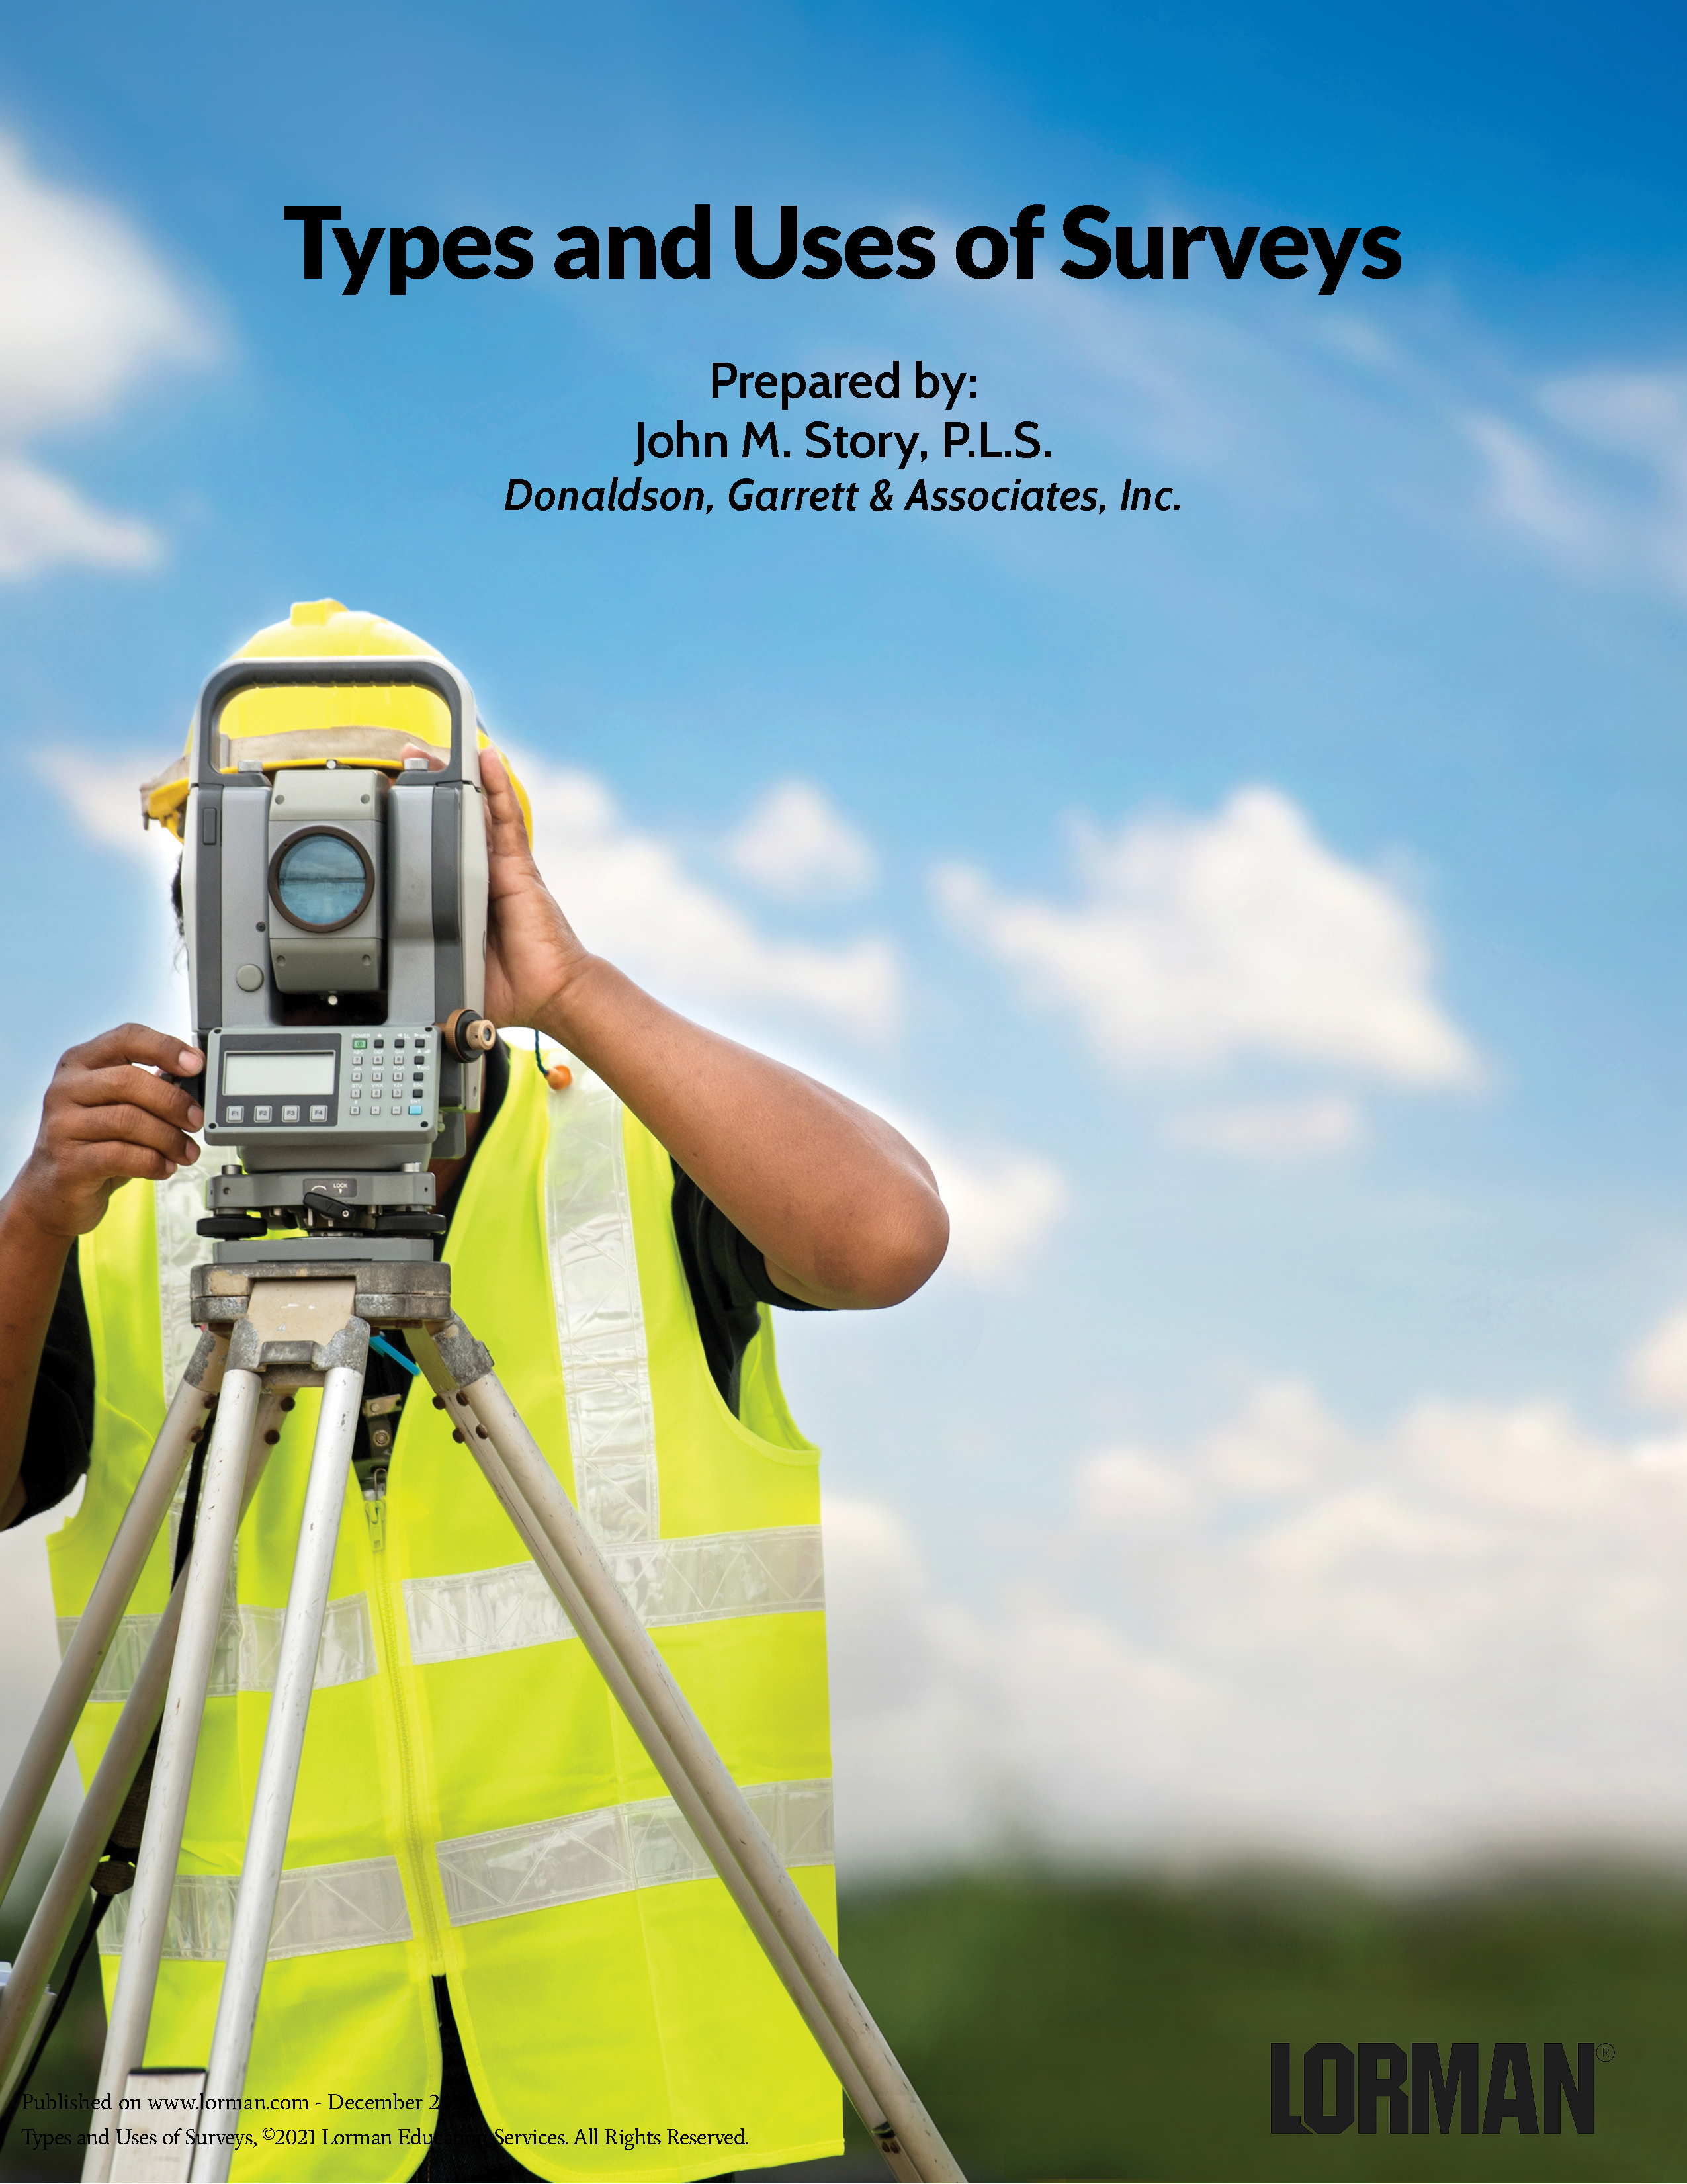 Types and Uses of Surveys